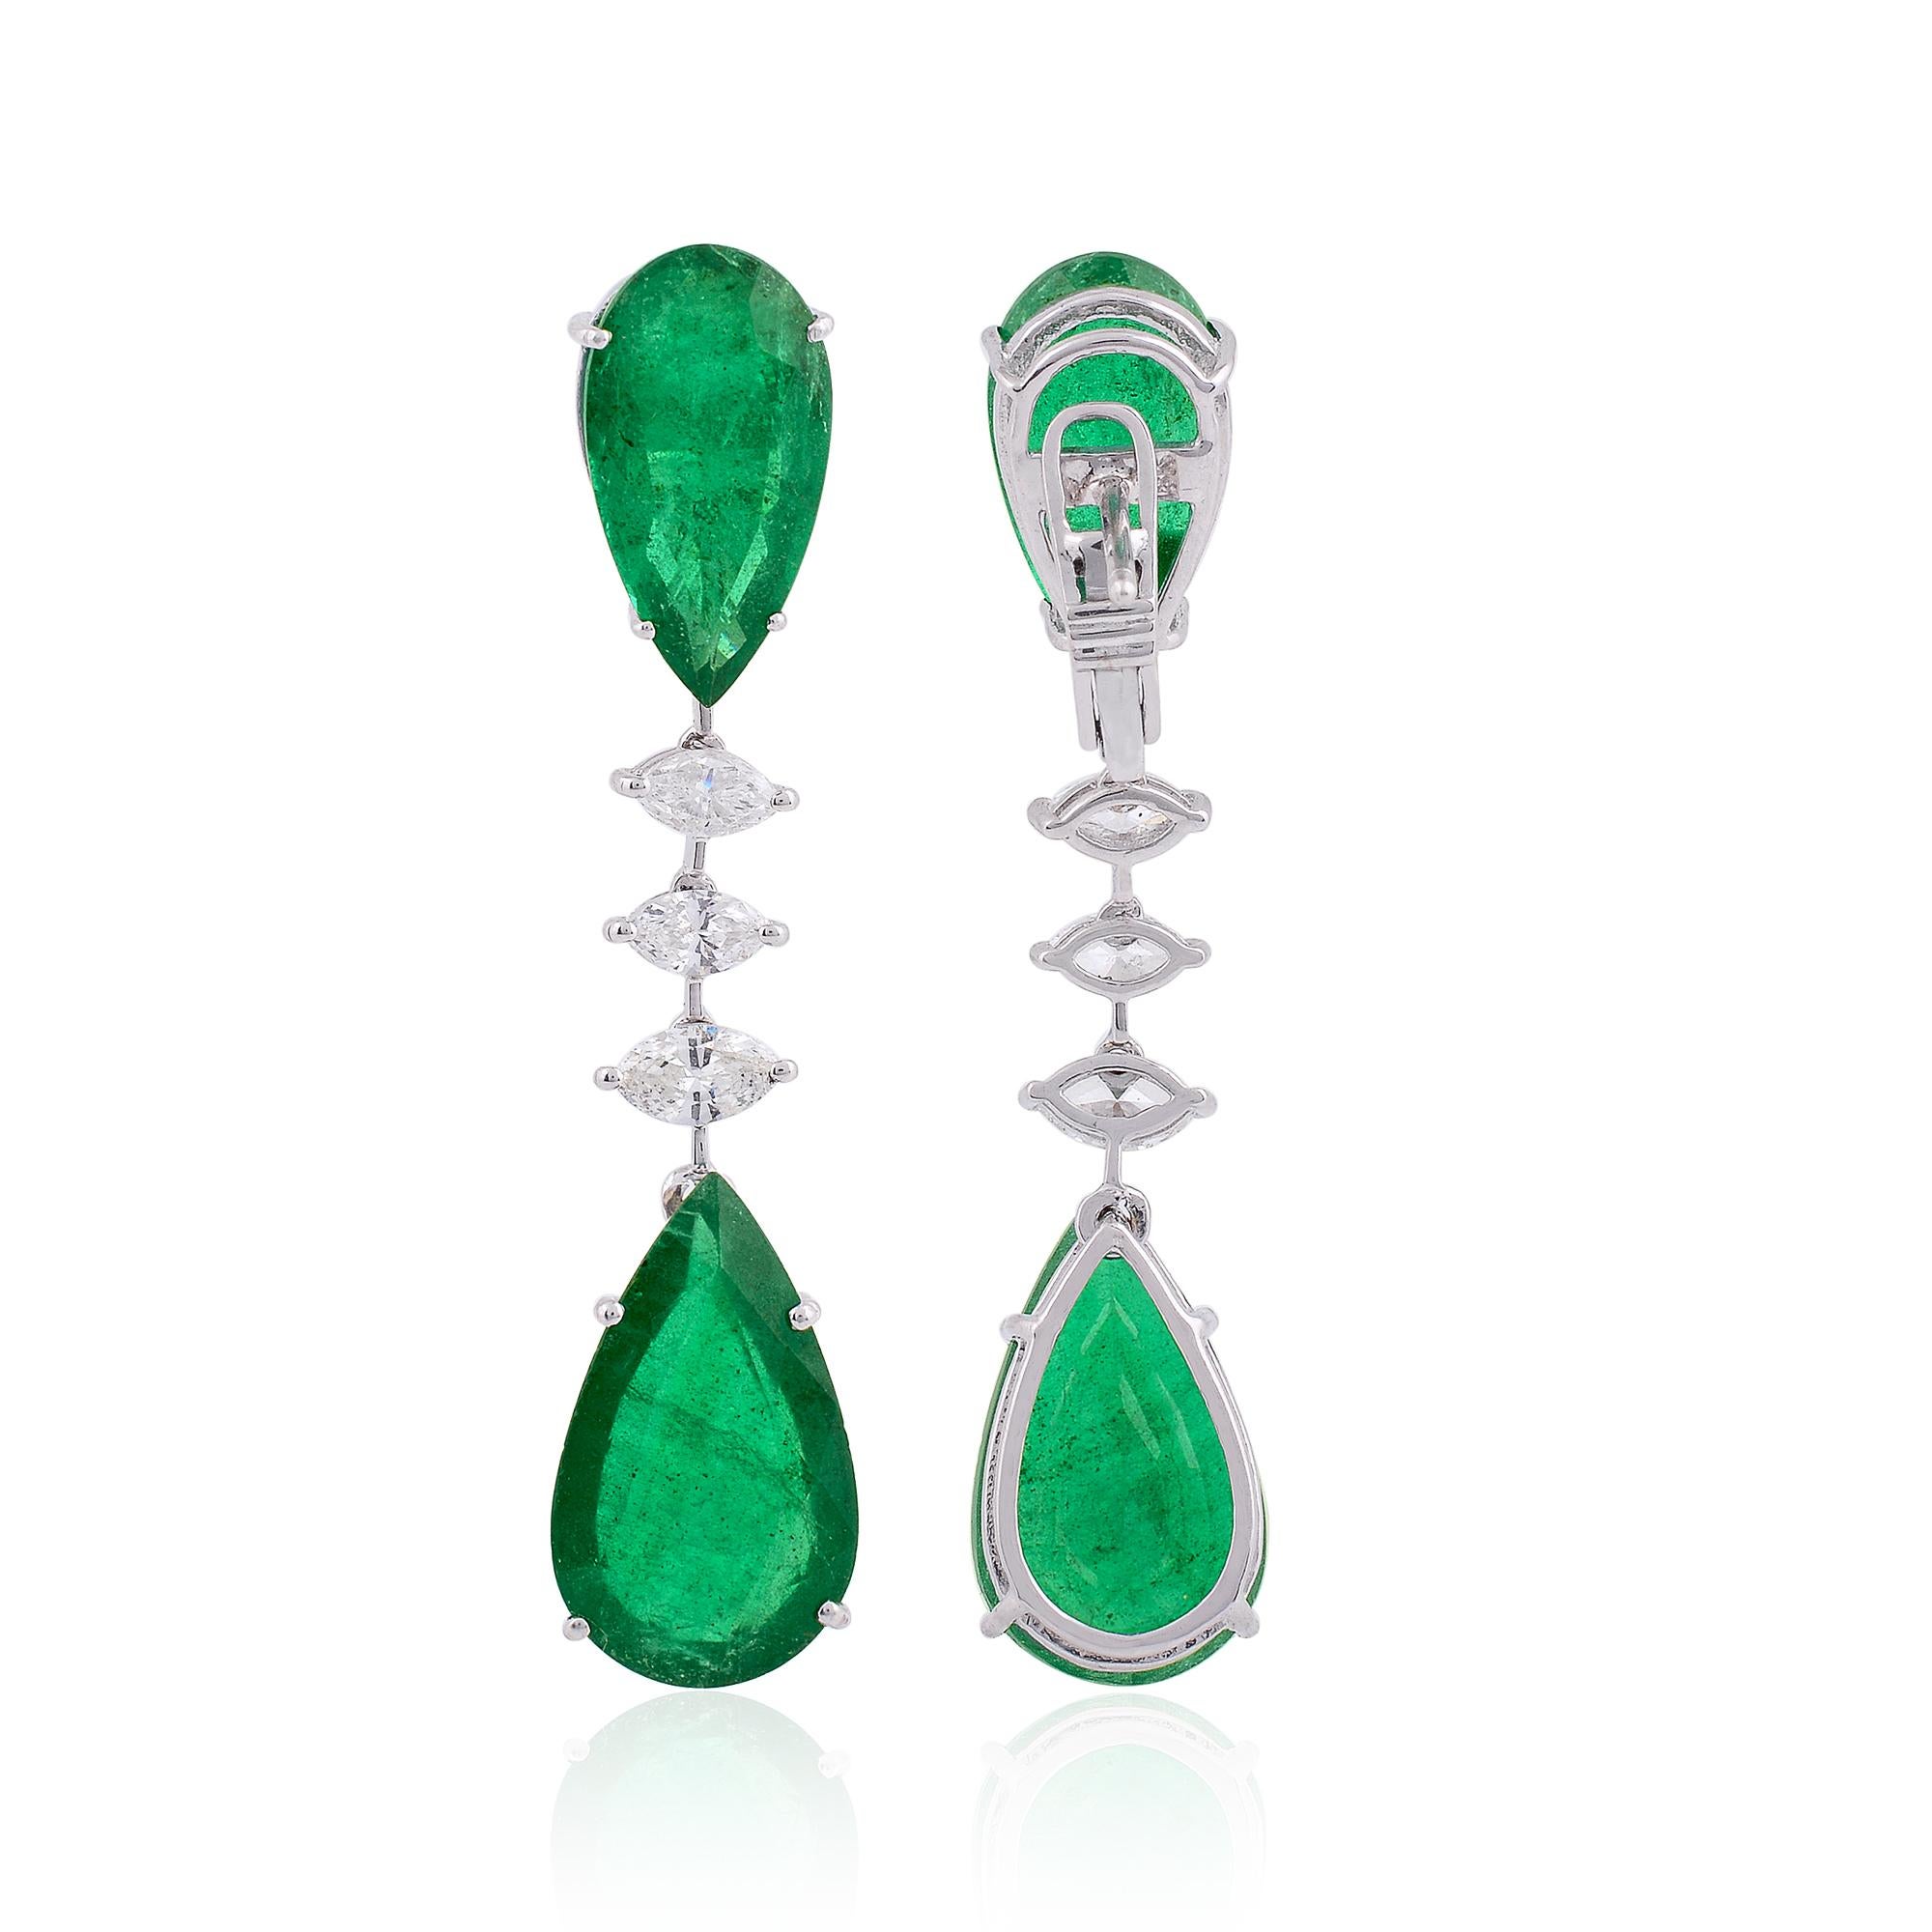 Item Code :- SEE-1351A
Gross Weight :- 10.53 gm
14k Solid White Gold Weight :- 6.17 gm
Natural Diamond Weight :- 1.31 carat  ( AVERAGE DIAMOND CLARITY SI1-SI2 & COLOR H-I )
Zambian Emerald Weight :- 20.49 carat
Earrings Size :- 50 mm approx.

✦